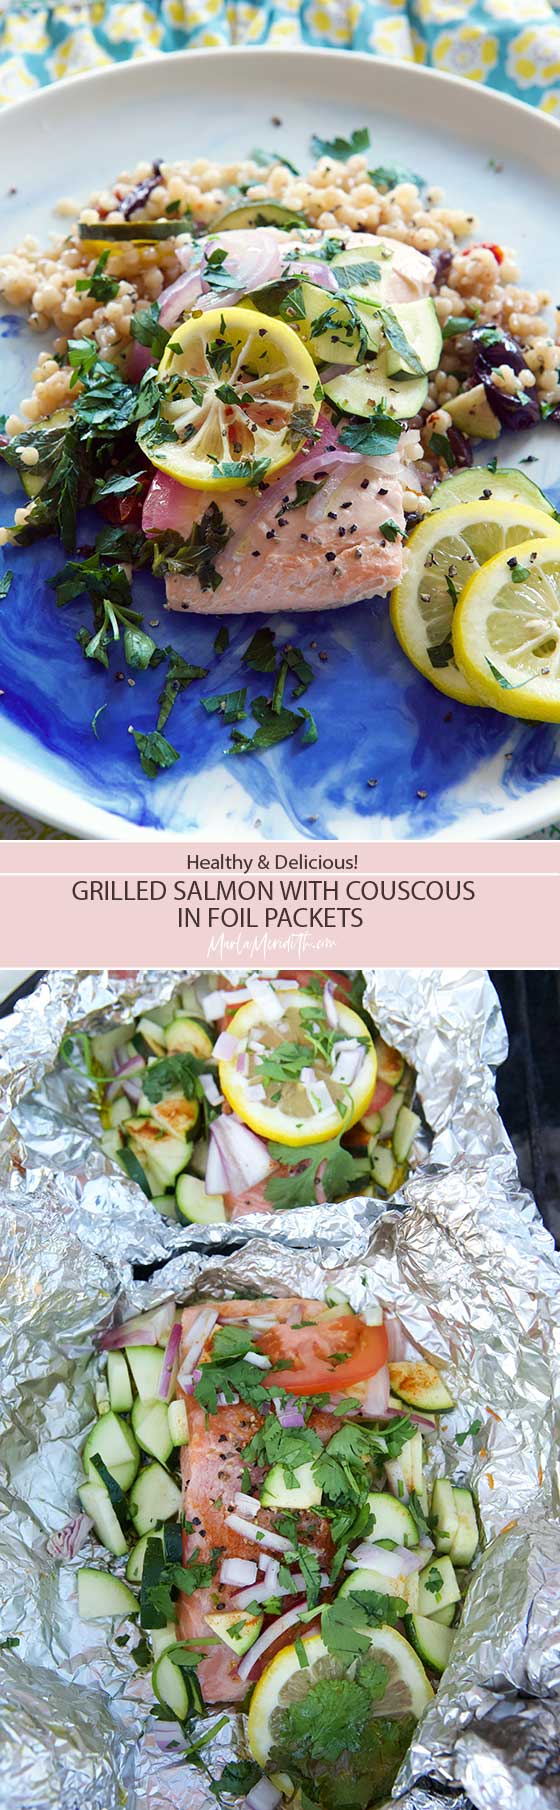 Grilled Salmon with Couscous in Foil Packets recipe